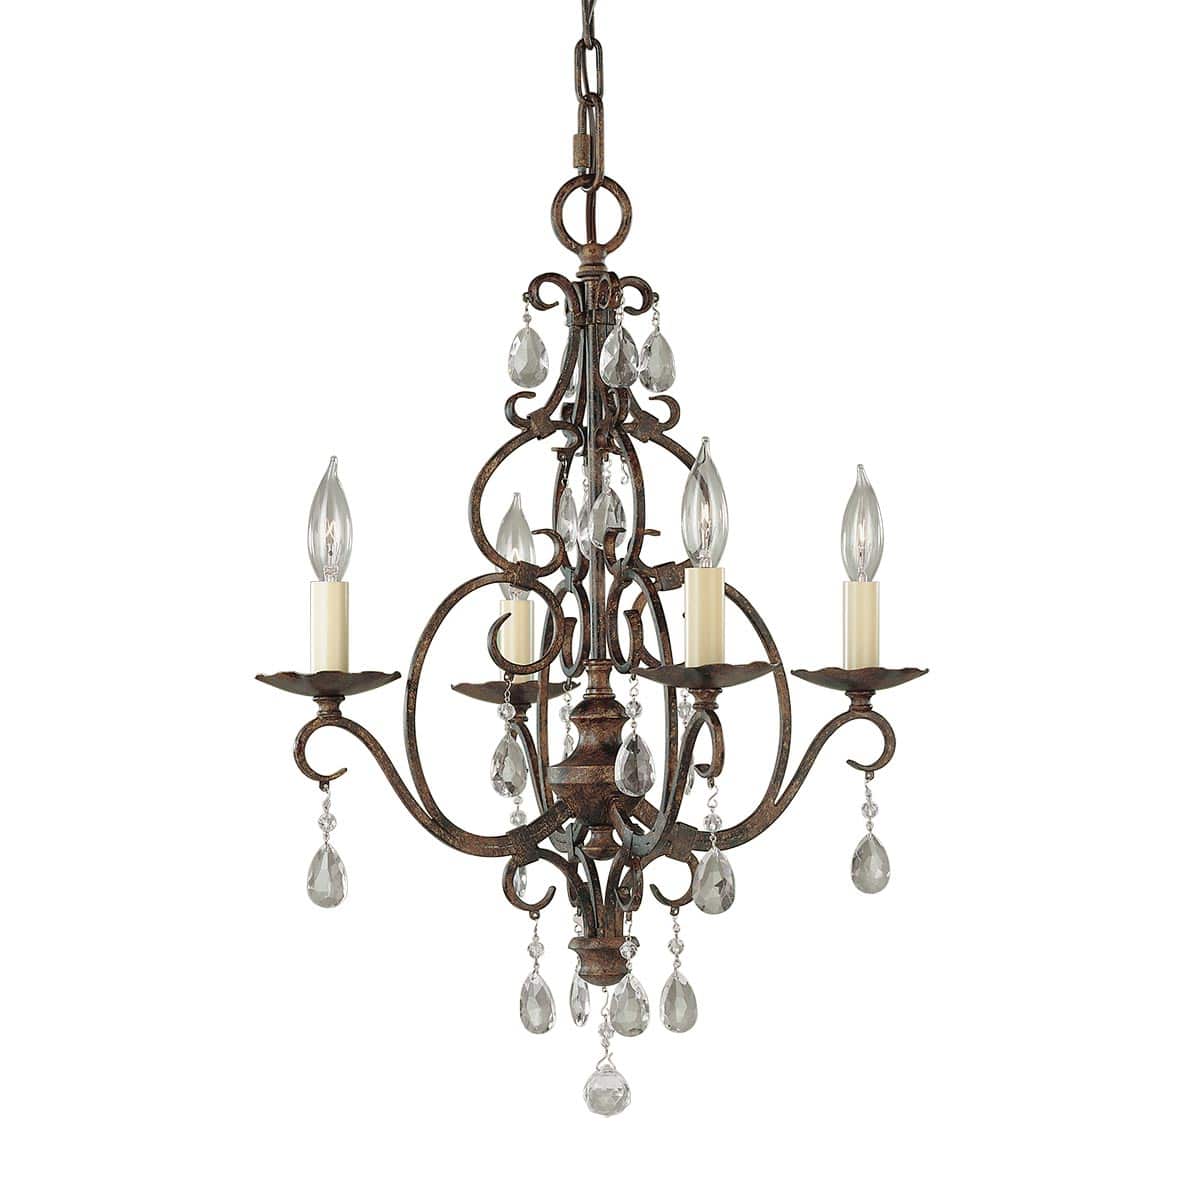 Chateau French 4 Light Birdcage Chandelier Mocha Bronze Crystal Drops